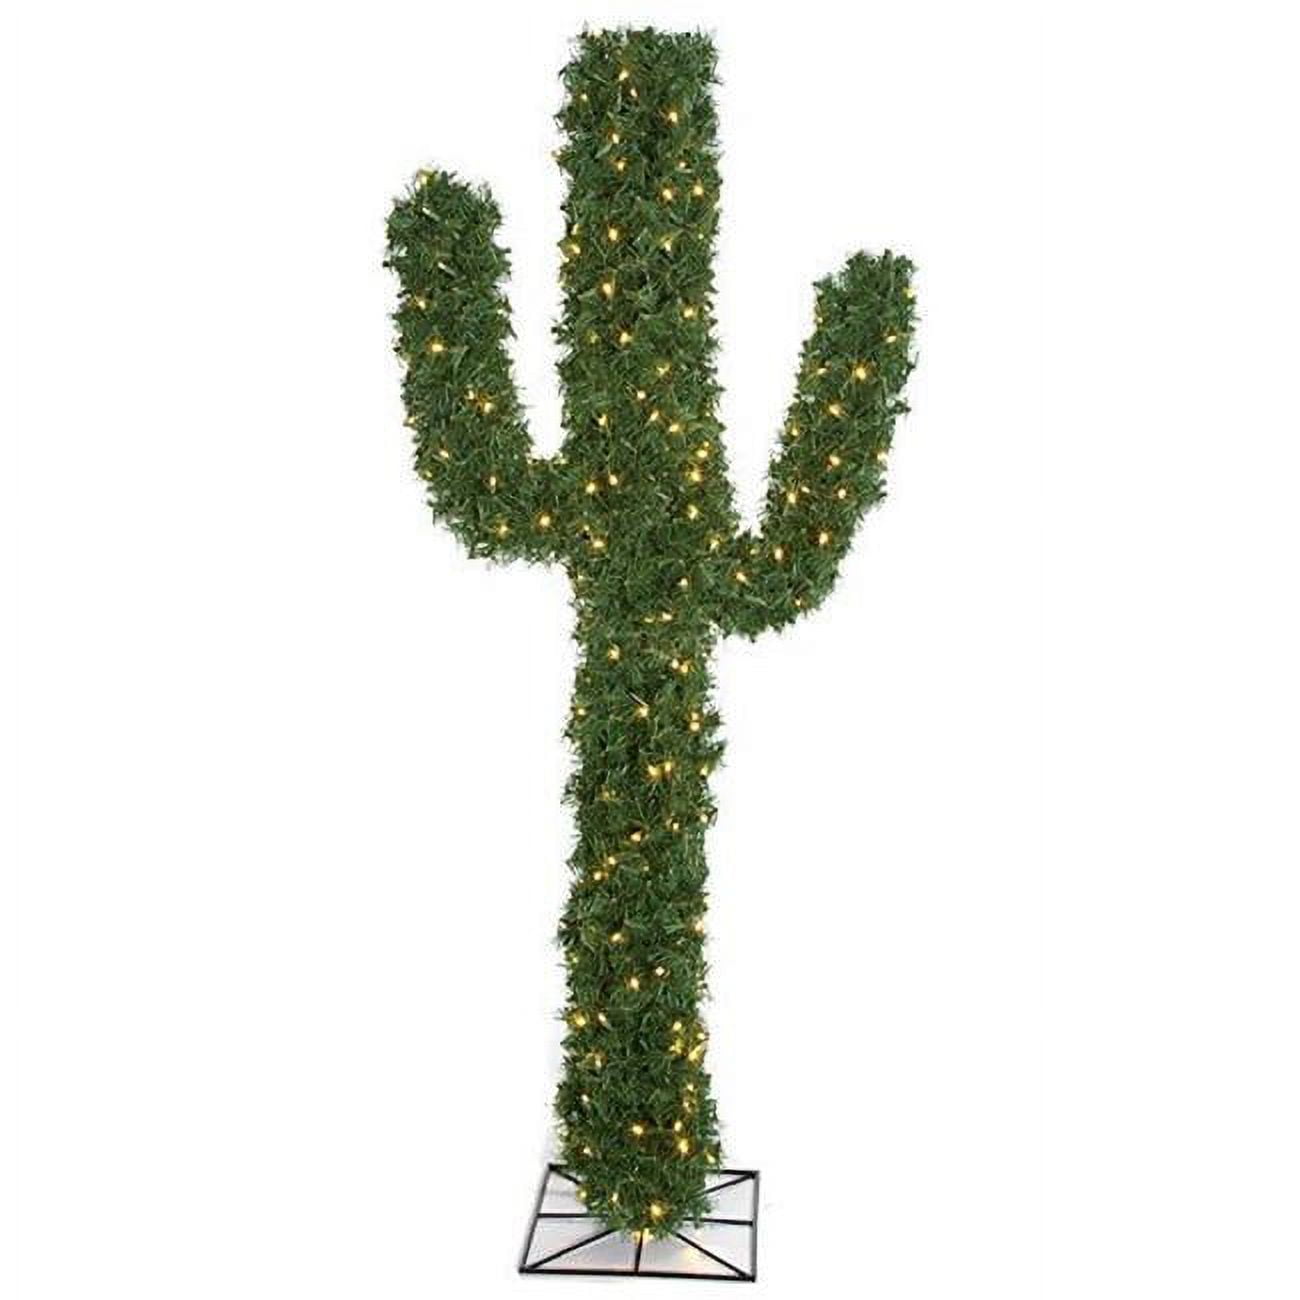 C-183004 5.5 Ft. Pvc Holiday Cactus Trees, Green